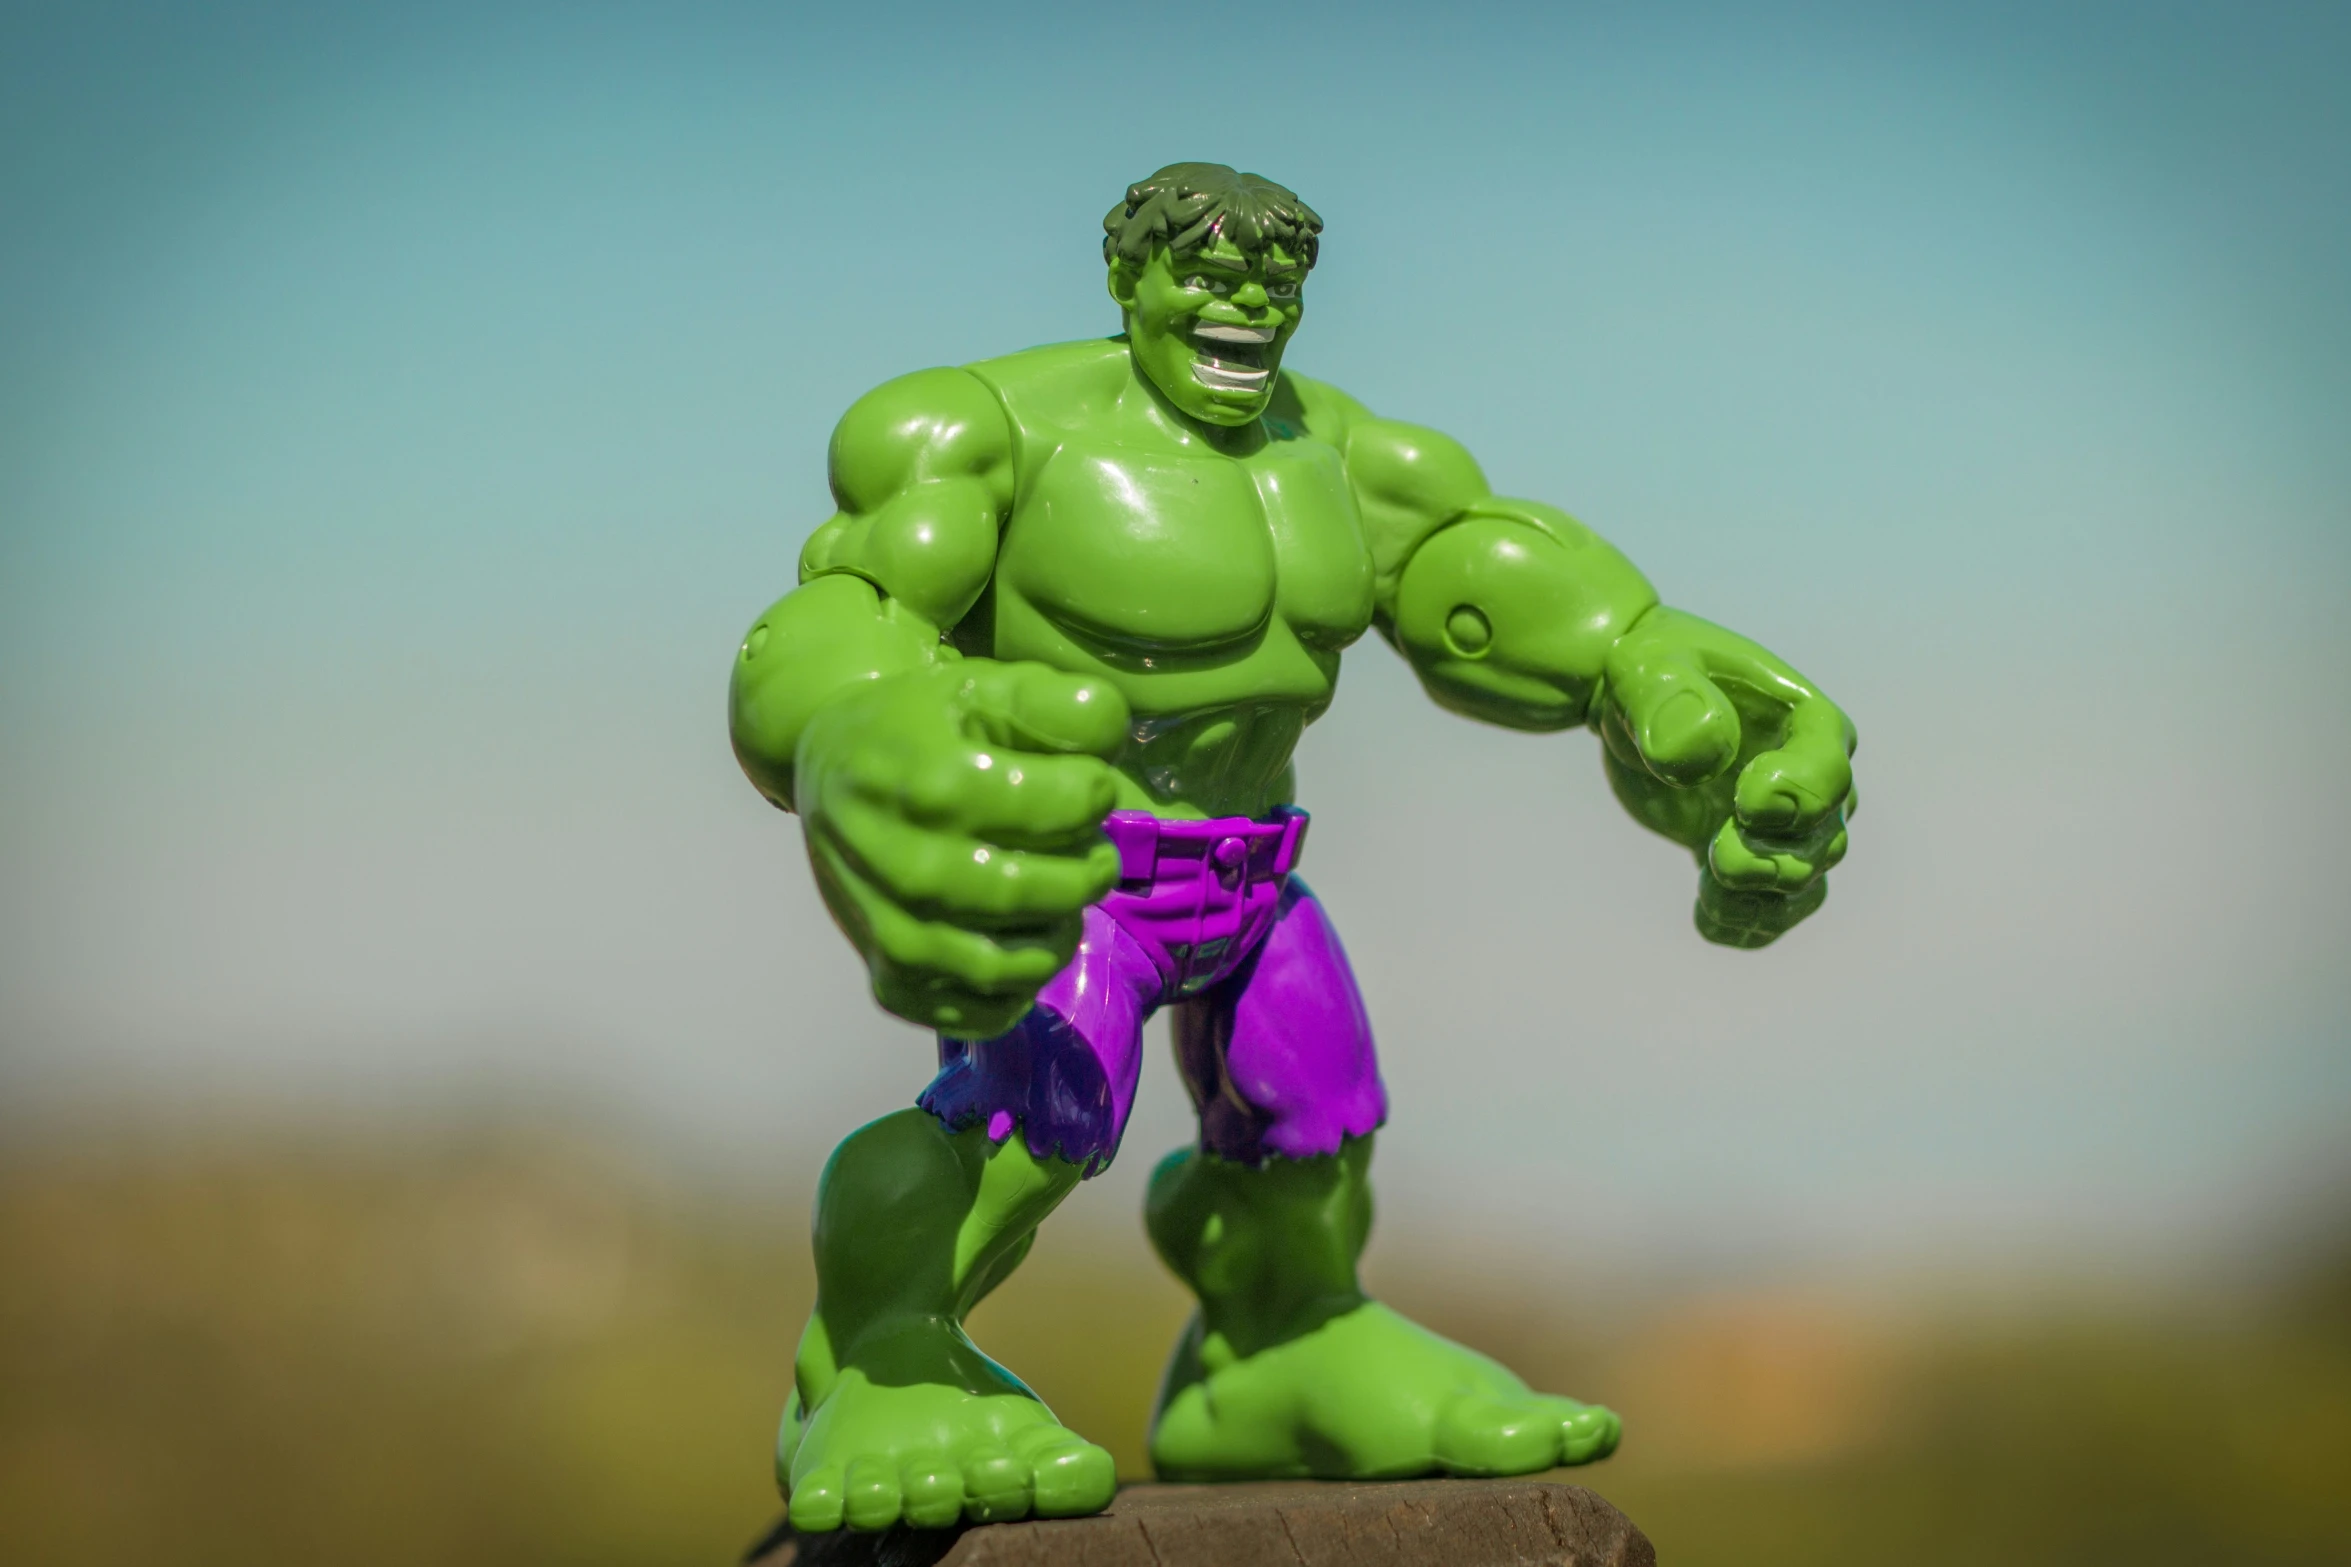 a toy hulk with a purple glove is in a grassy area